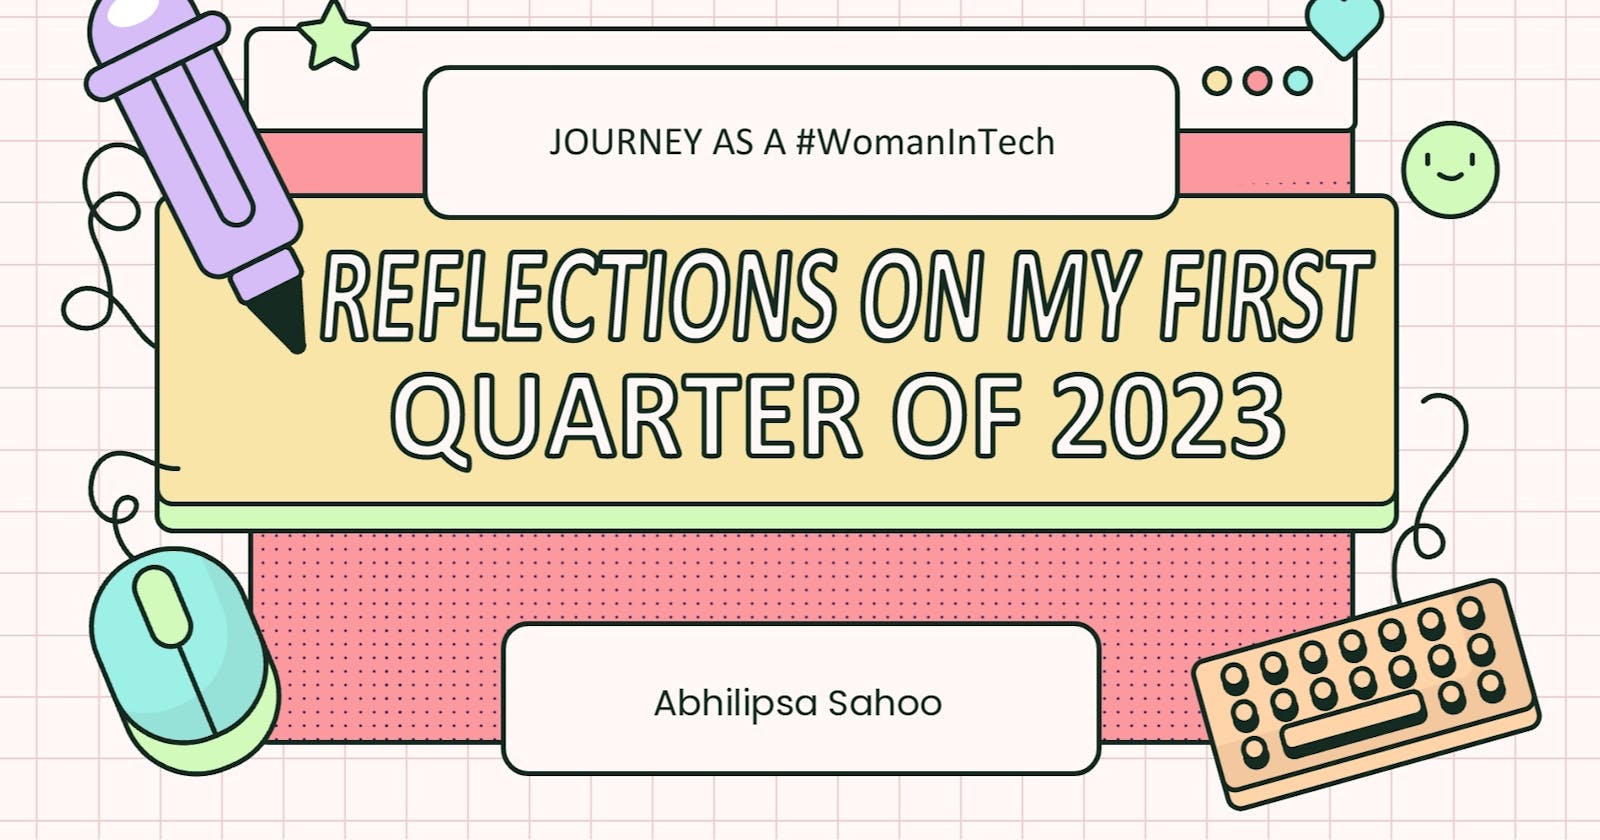 Reflections on My First Quarter of 2023: Journey as a #WomanInTech